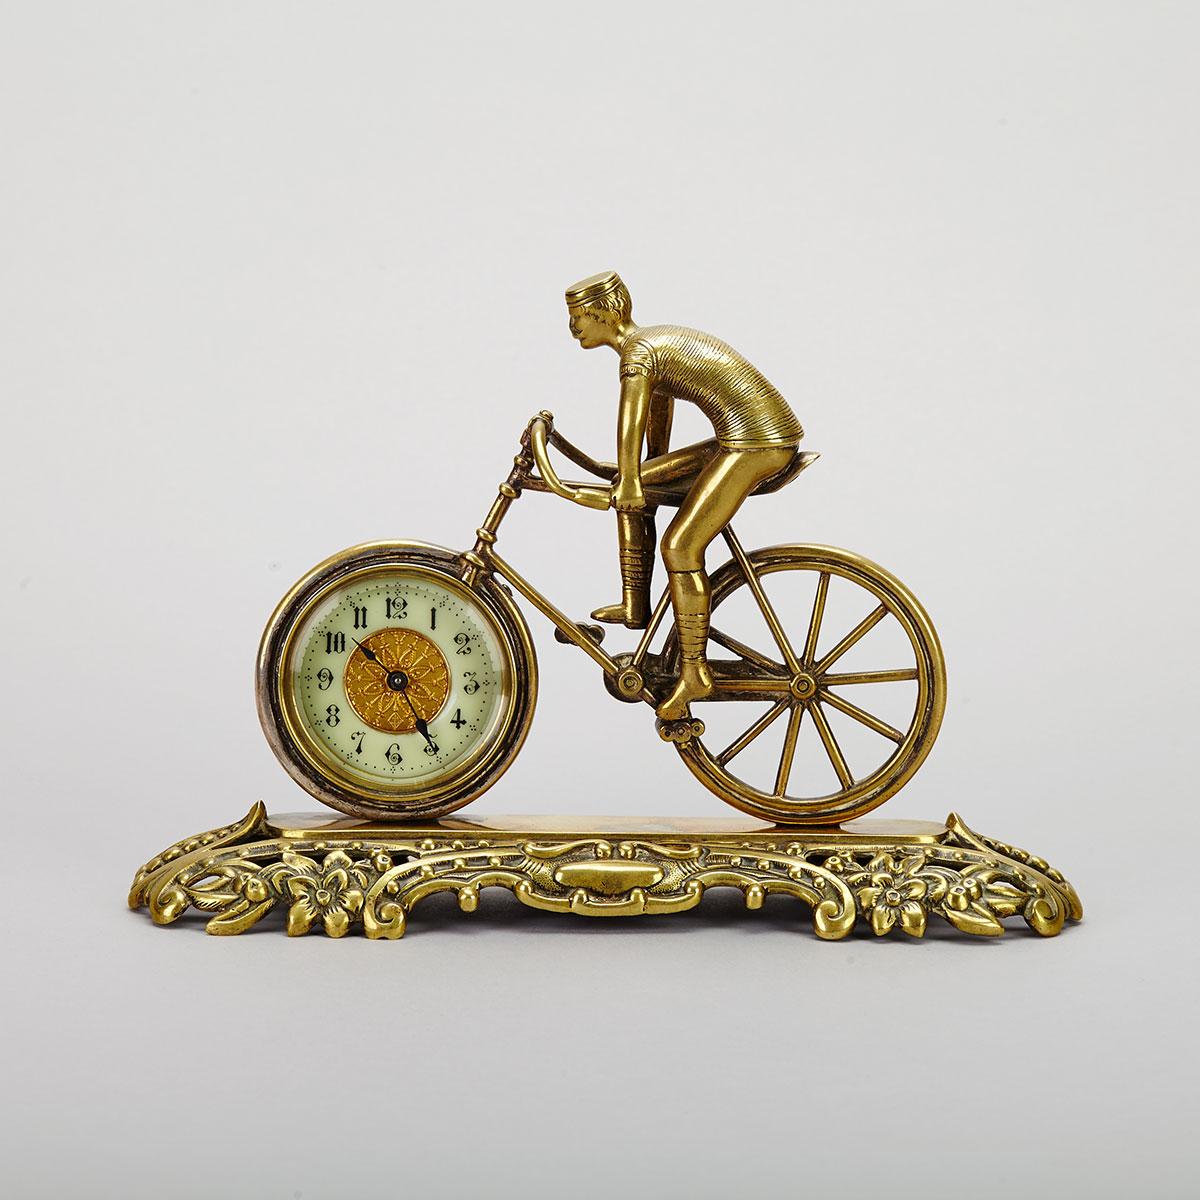 British United Clock Co. Brass Bicycle and Rider Form Novelty Desk Clock, 19th century